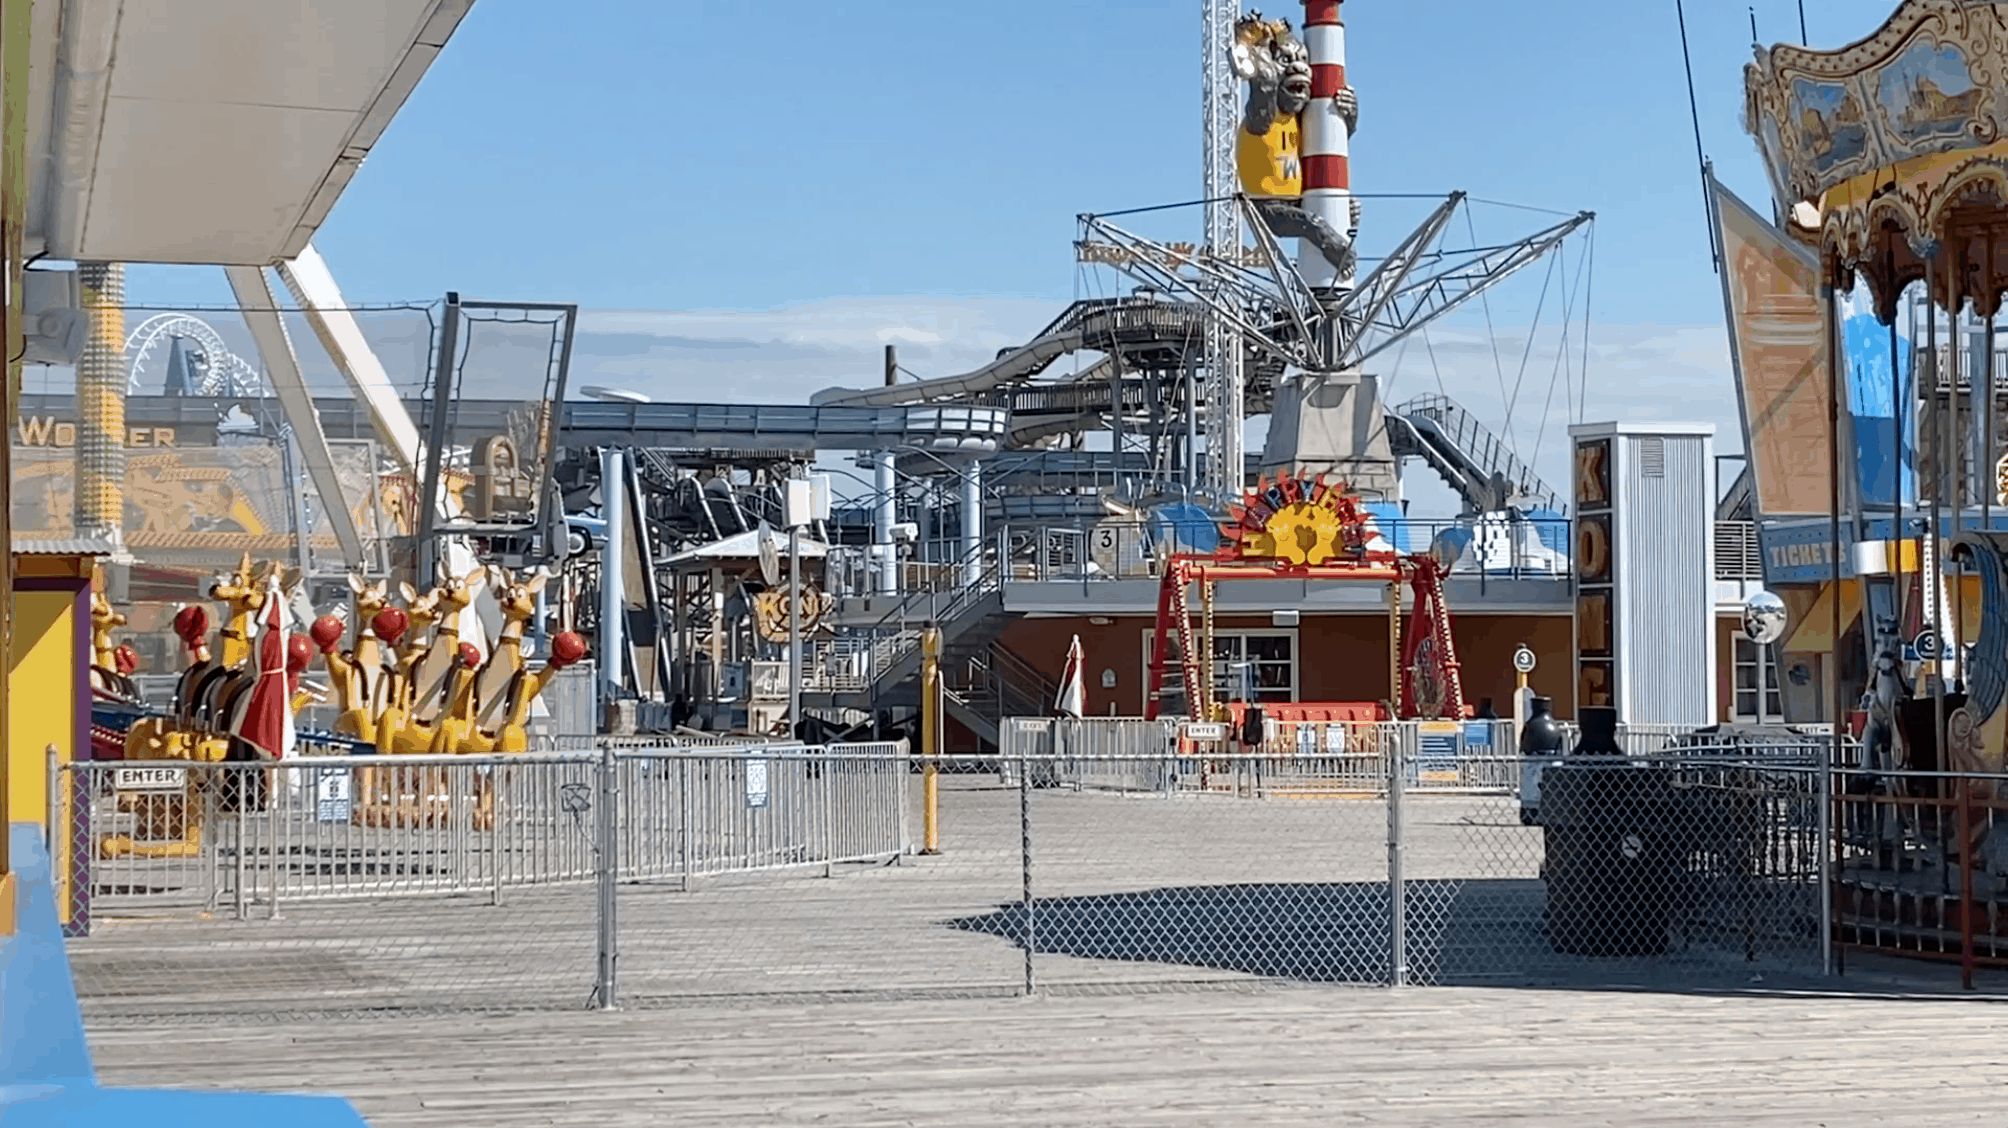 Morey's Surfside Pier Opens This Weekend